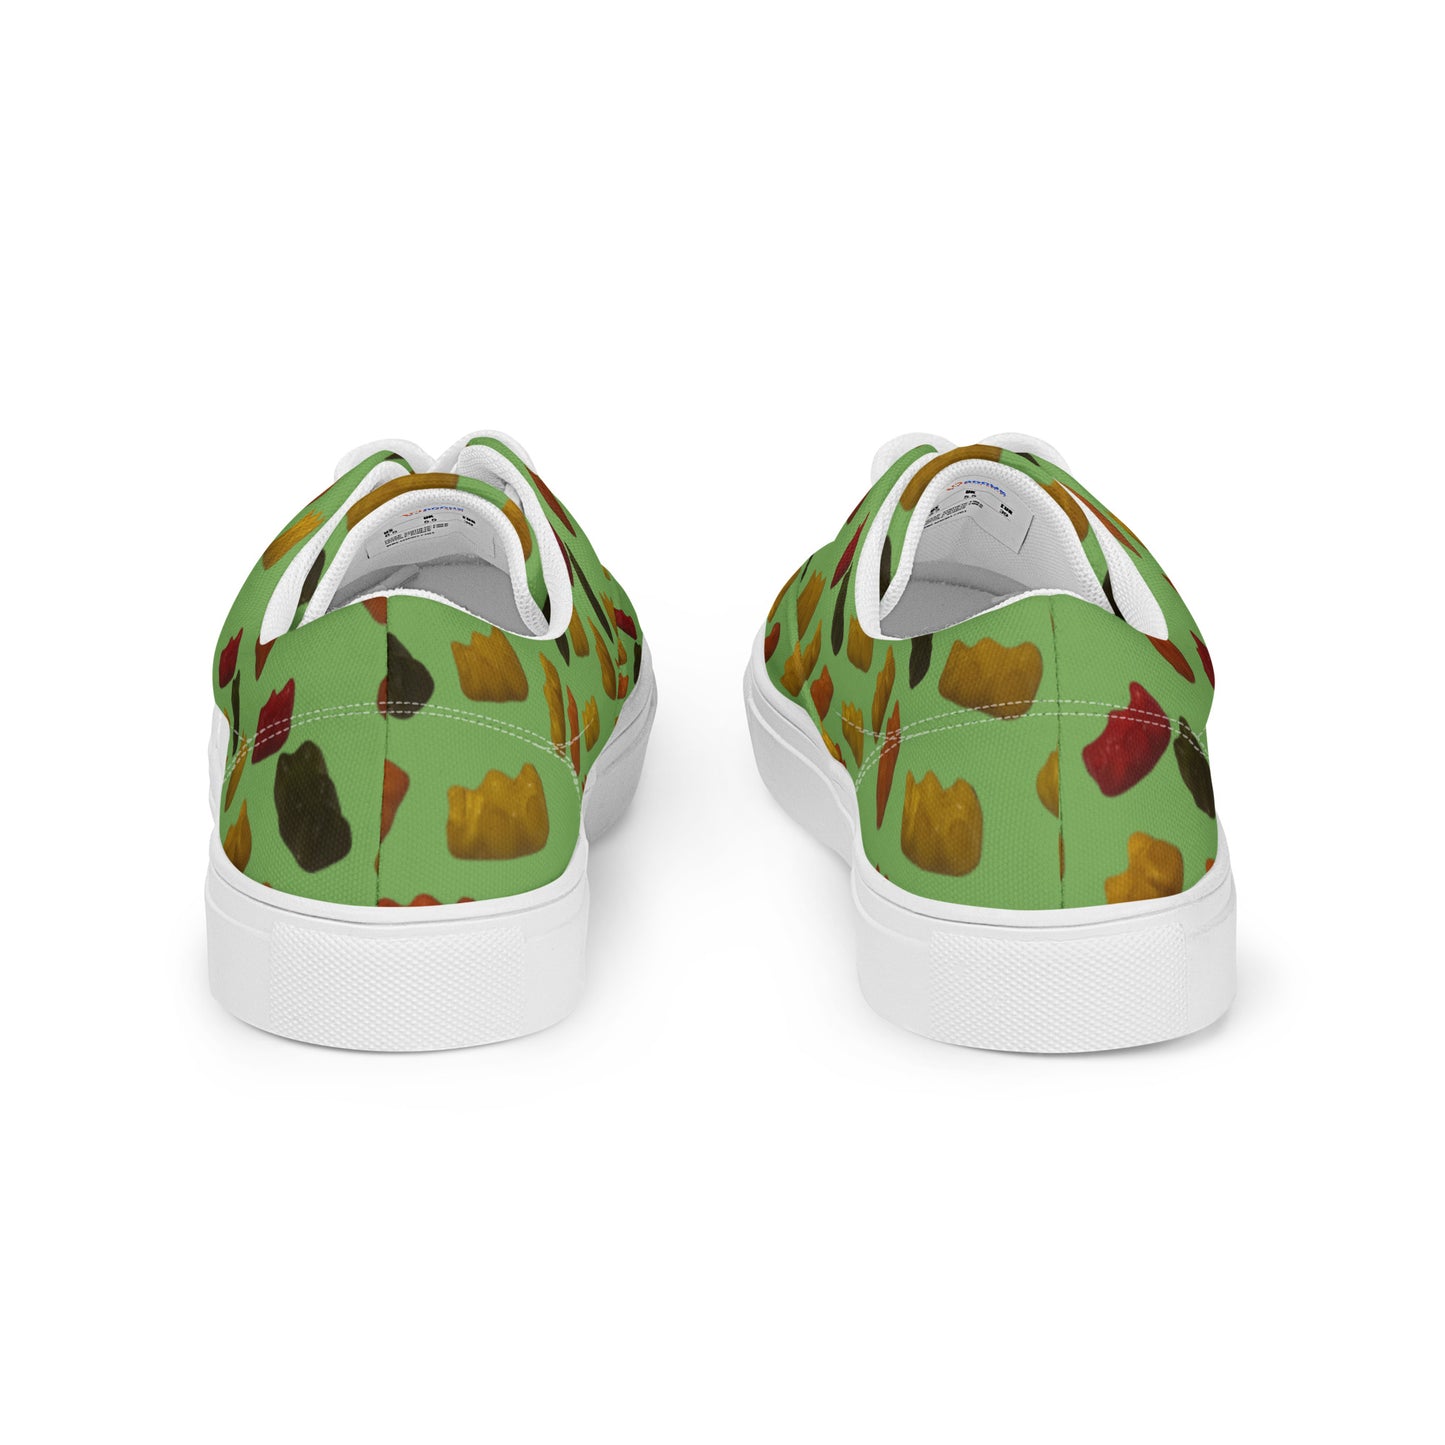 Gummy Bears - Men’s lace-up canvas shoes - Green